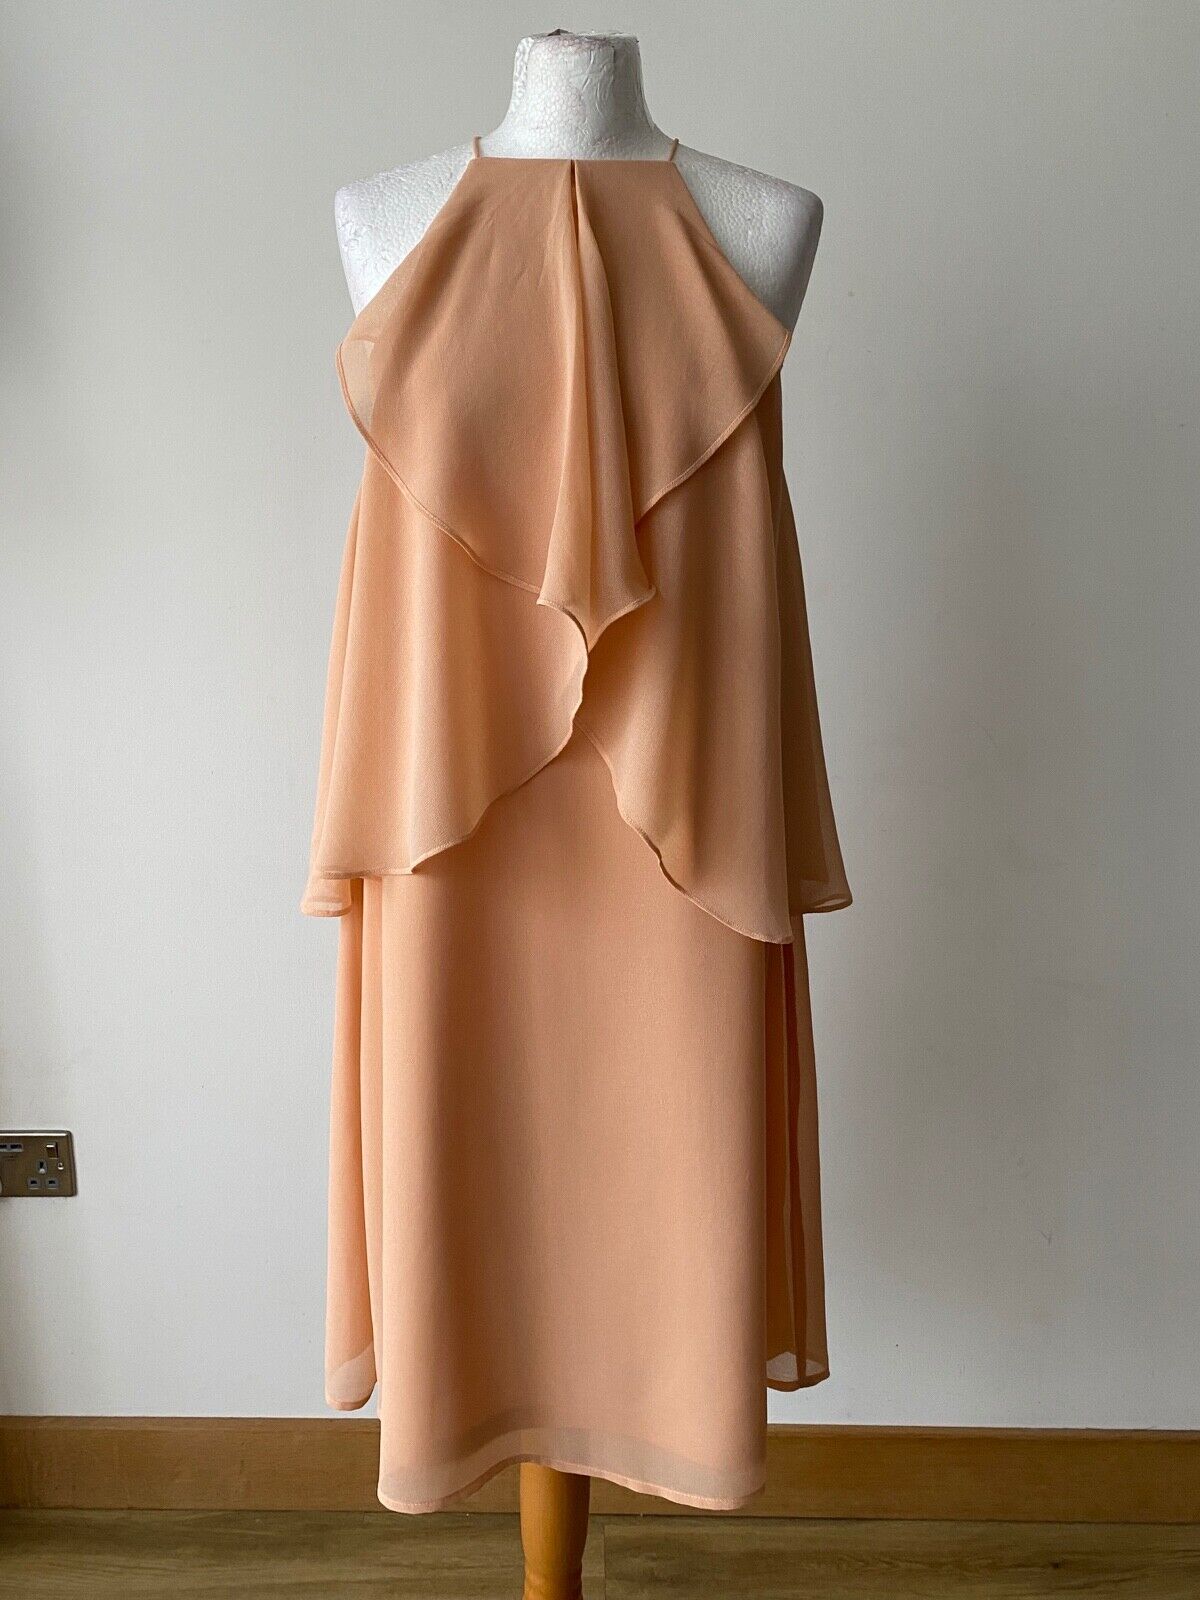 La Redoute Halterneck Chiffon Frill Layered Dress Available in Peach or Blue 10